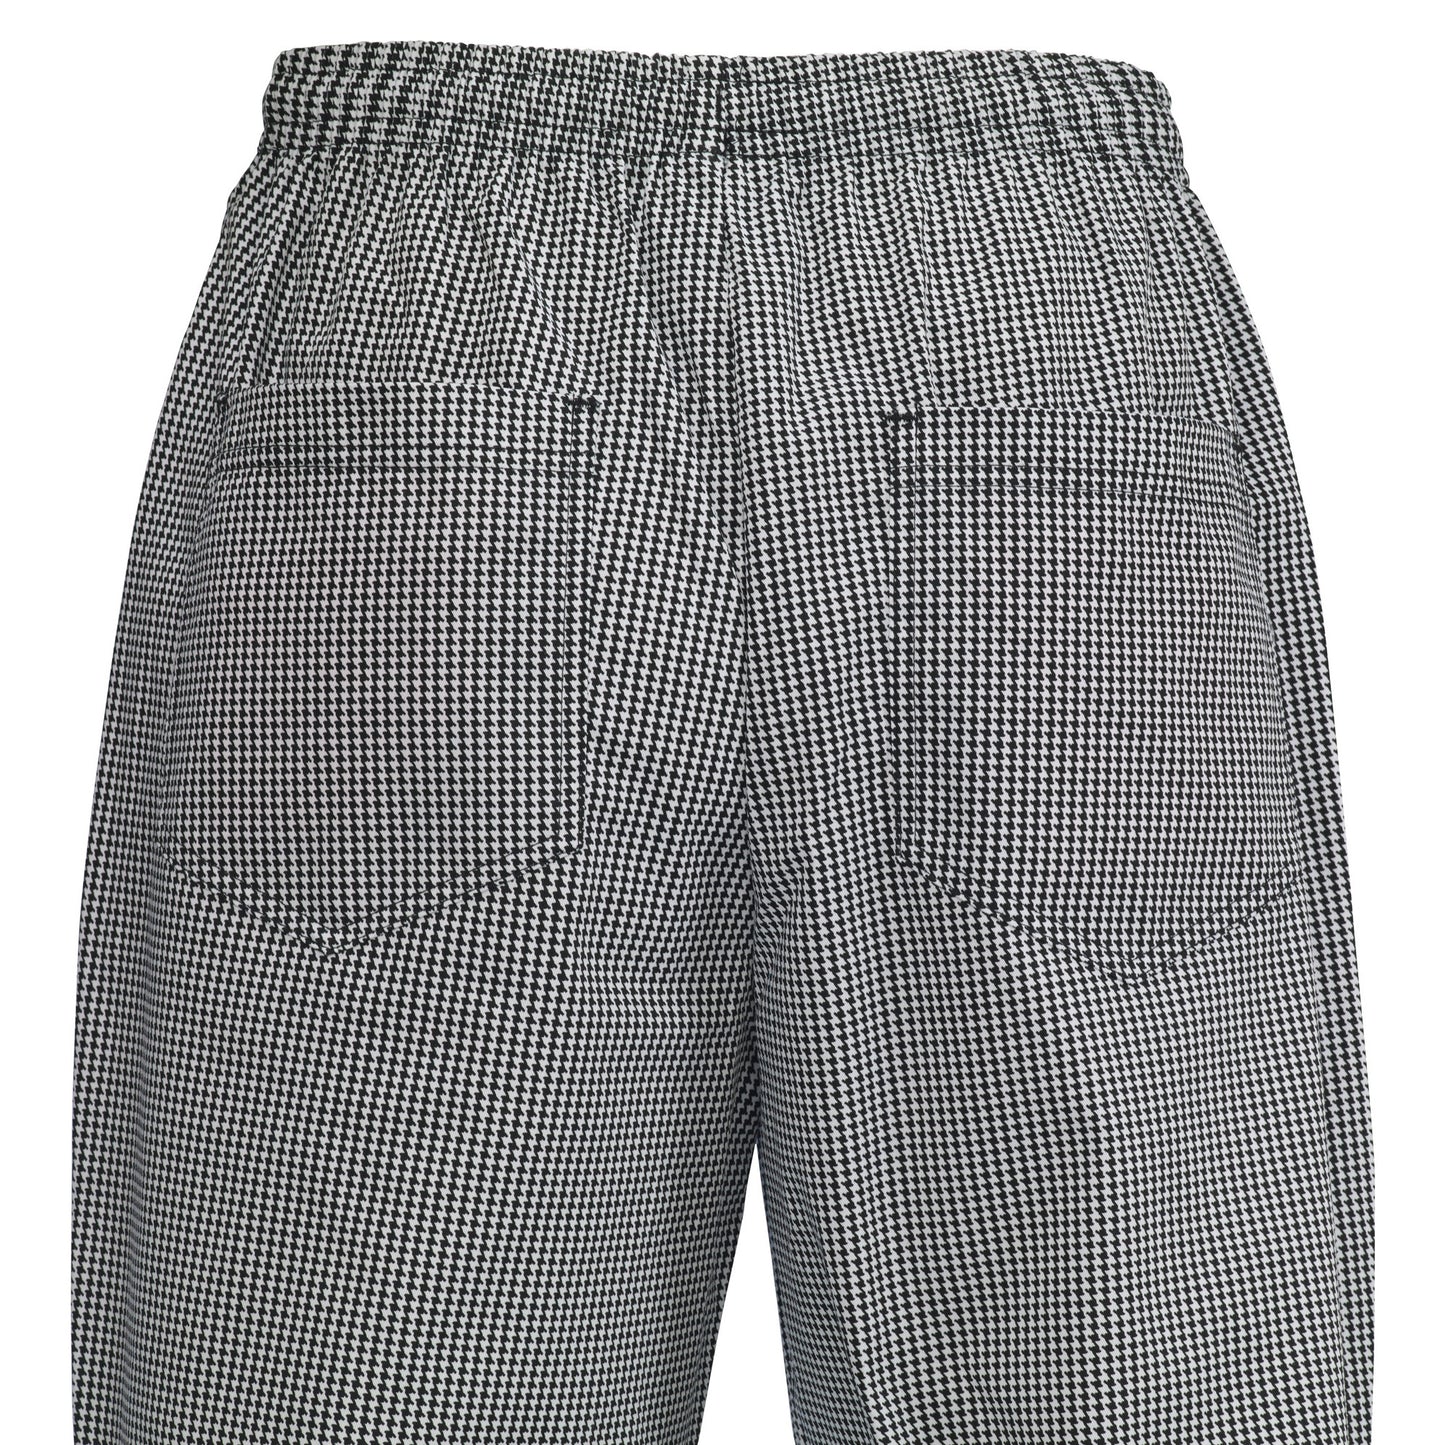 Chef Pants, Houndstooth - 2X-Large